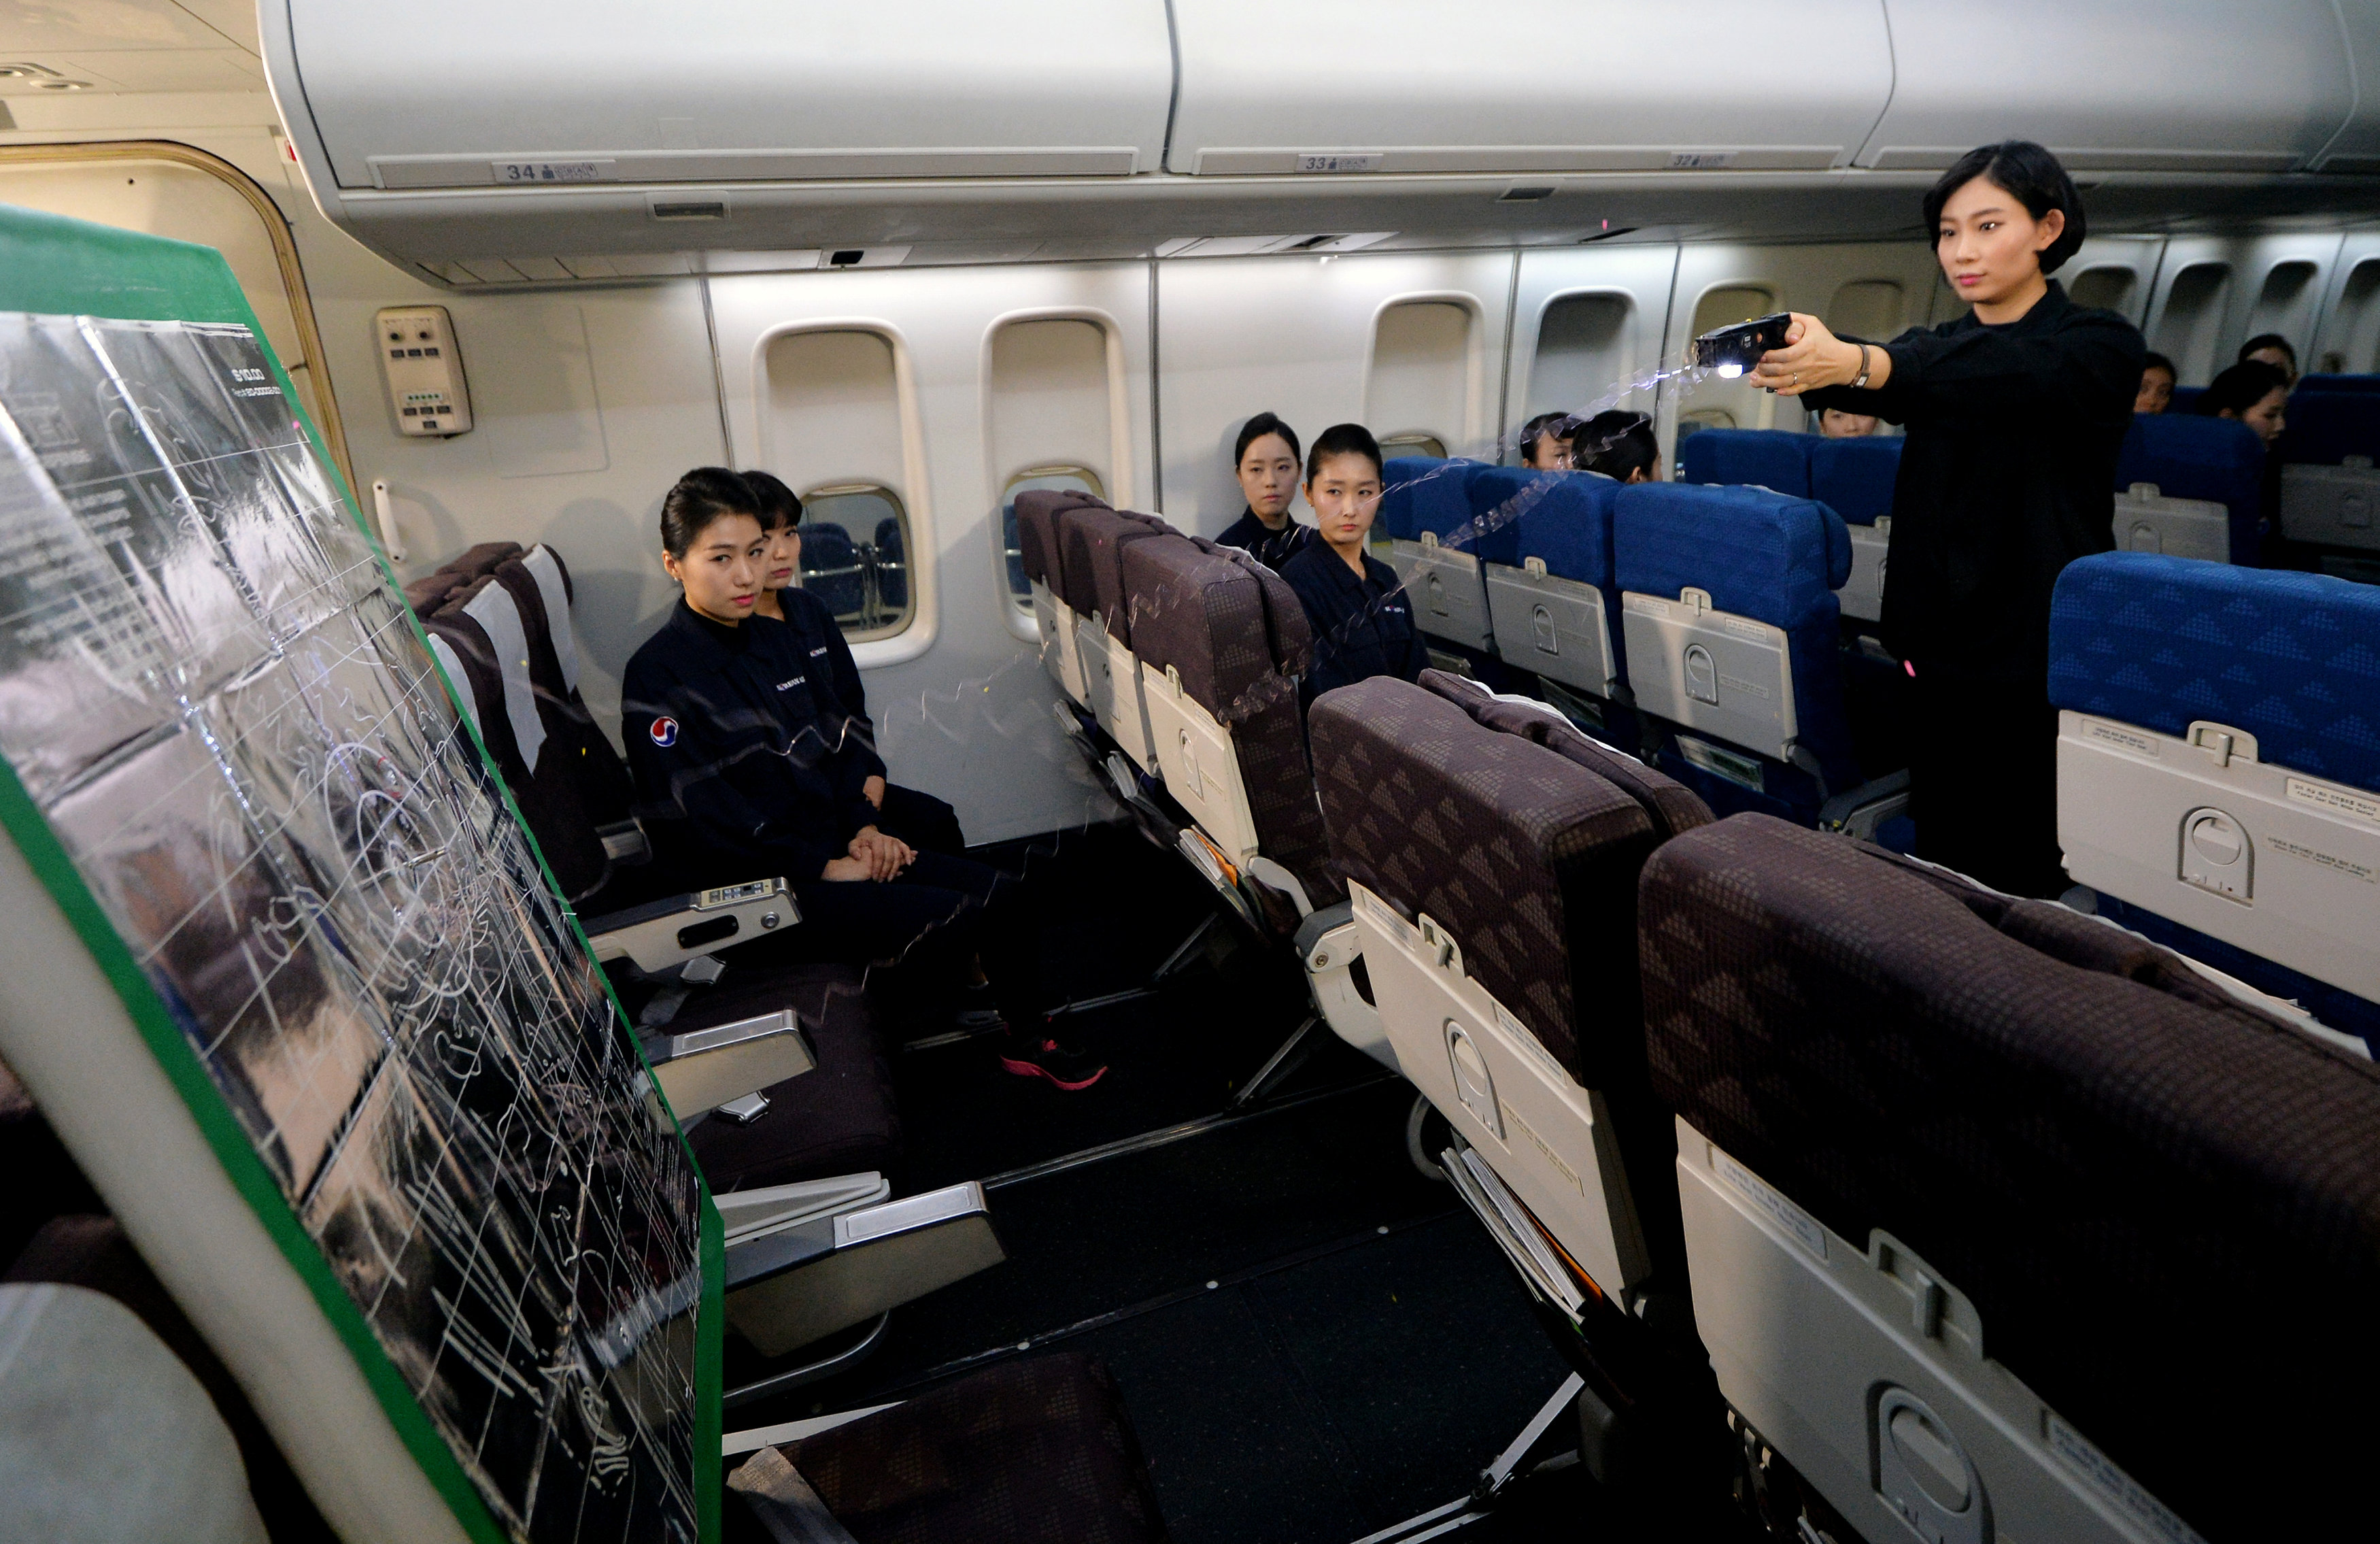 Cabin crews attend a training session on how to manage in-flight disturbances in Seoul, South Korea, December 27, 2016. Oh Dae-il/News1 via REUTERS ATTENTION EDITORS - THIS IMAGE HAS BEEN SUPPLIED BY A THIRD PARTY. SOUTH KOREA OUT. FOR EDITORIAL USE ONLY.